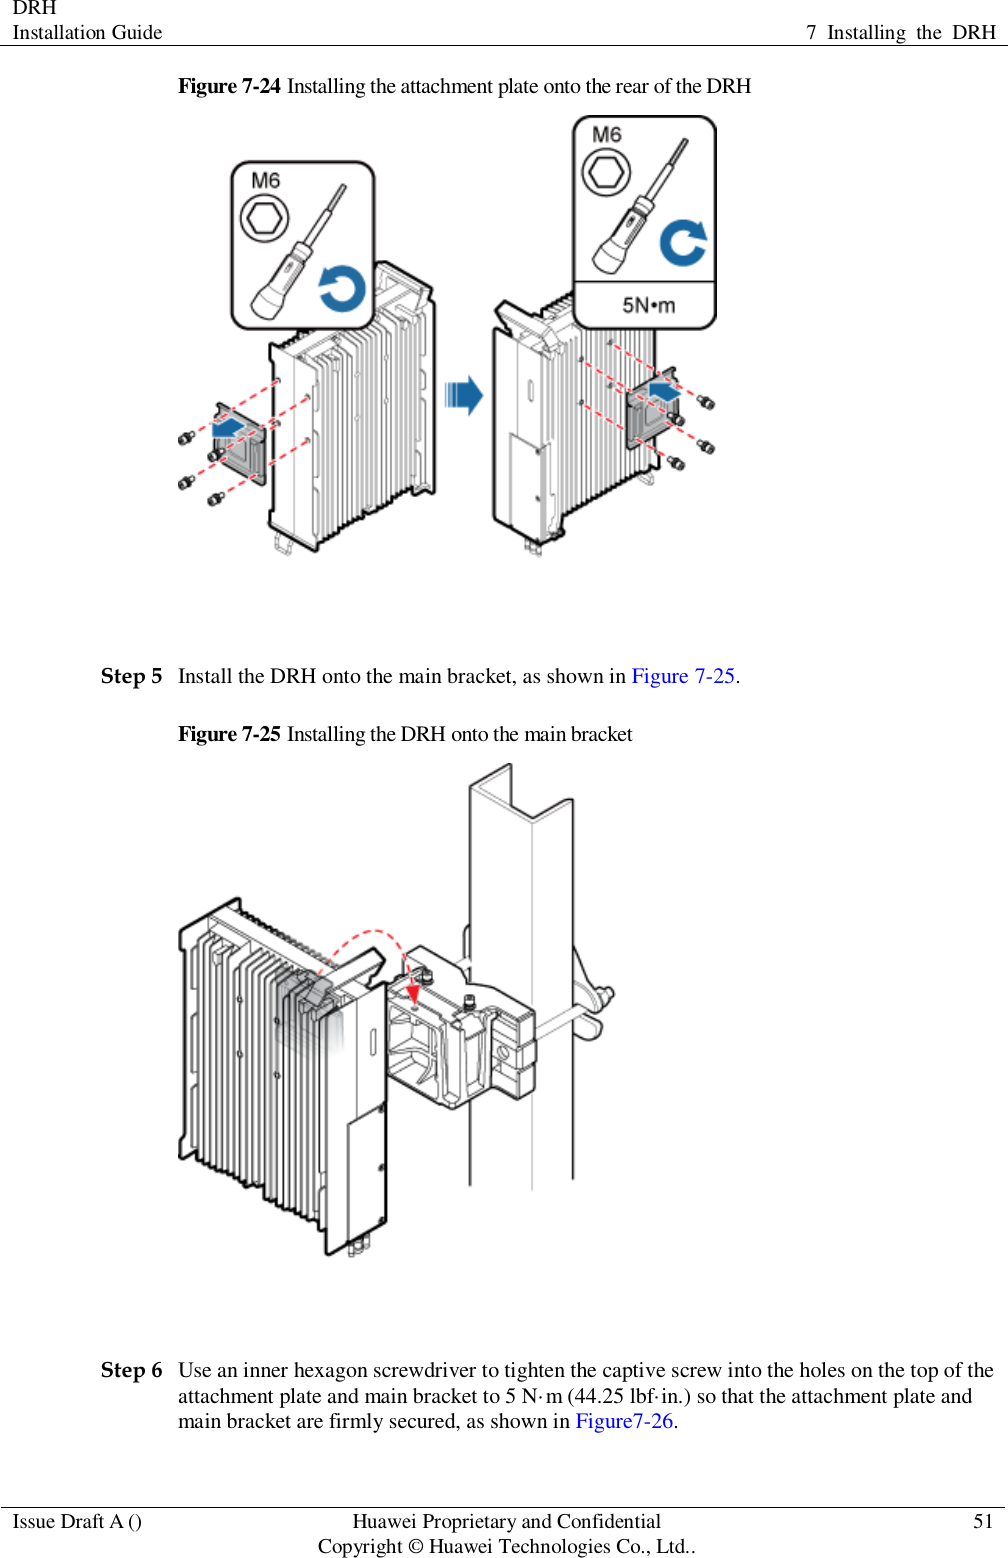 DRH   Installation Guide 7  Installing  the  DRH  Issue Draft A () Huawei Proprietary and Confidential                                     Copyright © Huawei Technologies Co., Ltd.. 51  Figure 7-24 Installing the attachment plate onto the rear of the DRH   Step 5 Install the DRH onto the main bracket, as shown in Figure 7-25. Figure 7-25 Installing the DRH onto the main bracket   Step 6 Use an inner hexagon screwdriver to tighten the captive screw into the holes on the top of the attachment plate and main bracket to 5 N·m (44.25 lbf·in.) so that the attachment plate and main bracket are firmly secured, as shown in Figure7-26. 